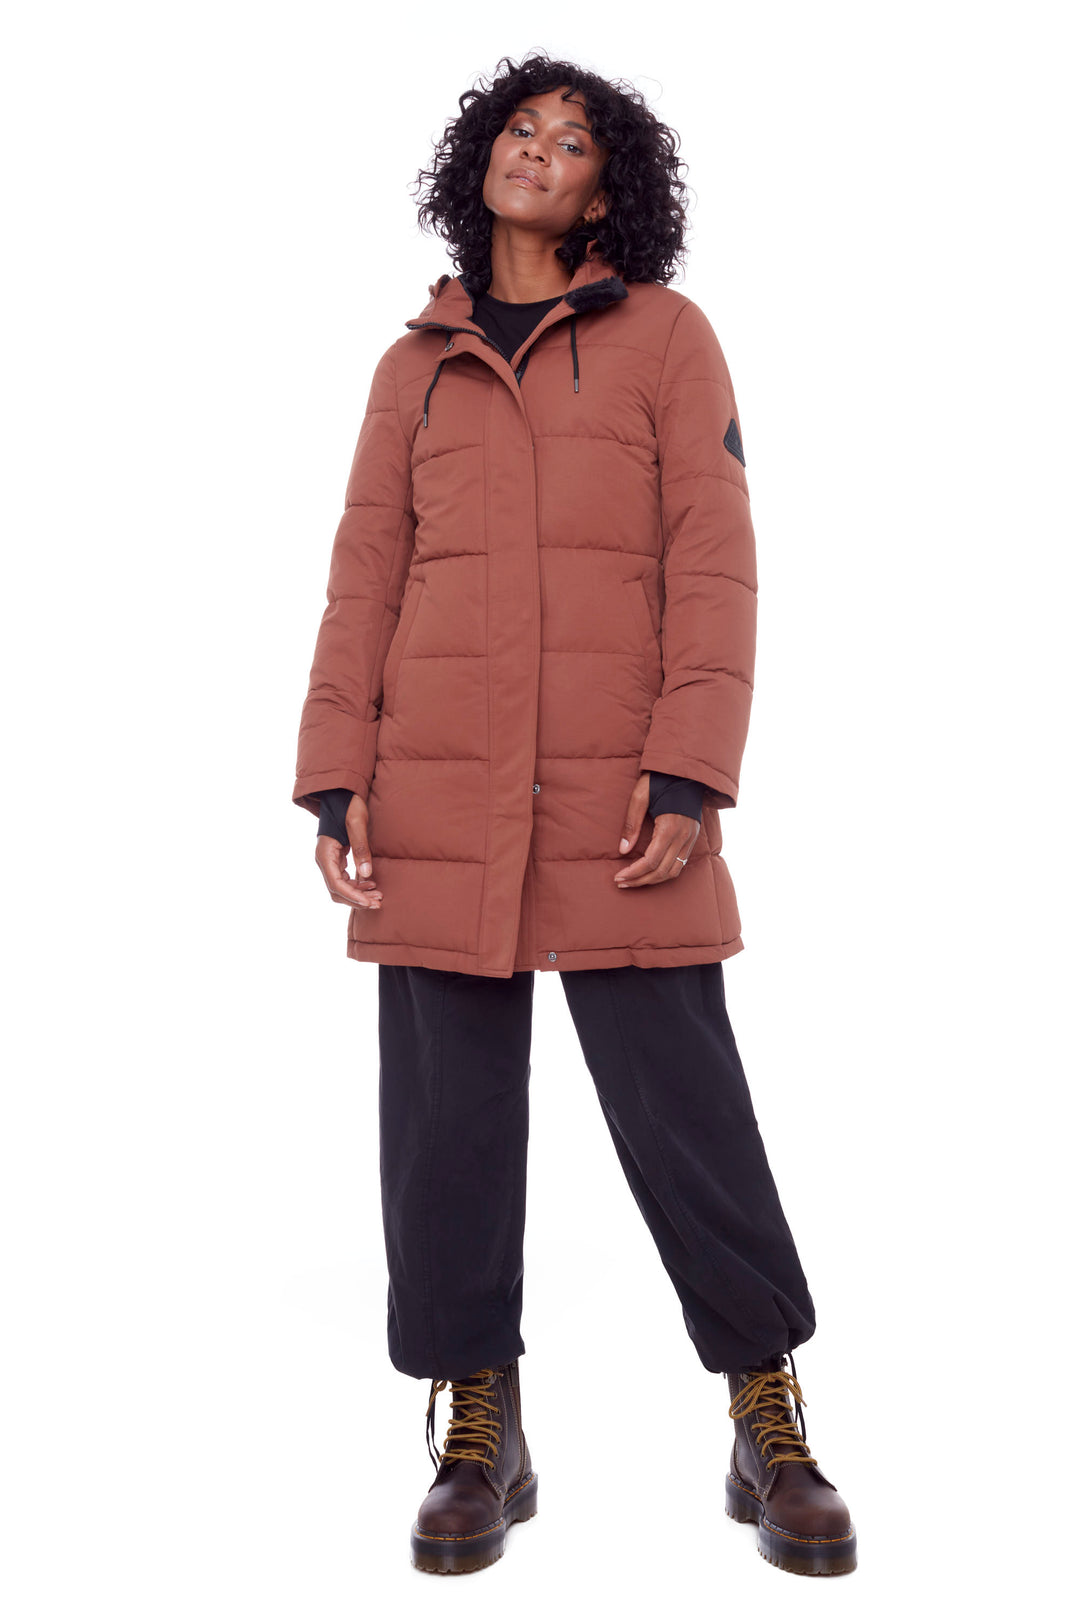 AULAVIK | WOMEN'S VEGAN DOWN (RECYCLED) MID-LENGTH HOODED PARKA COAT, MAPLE